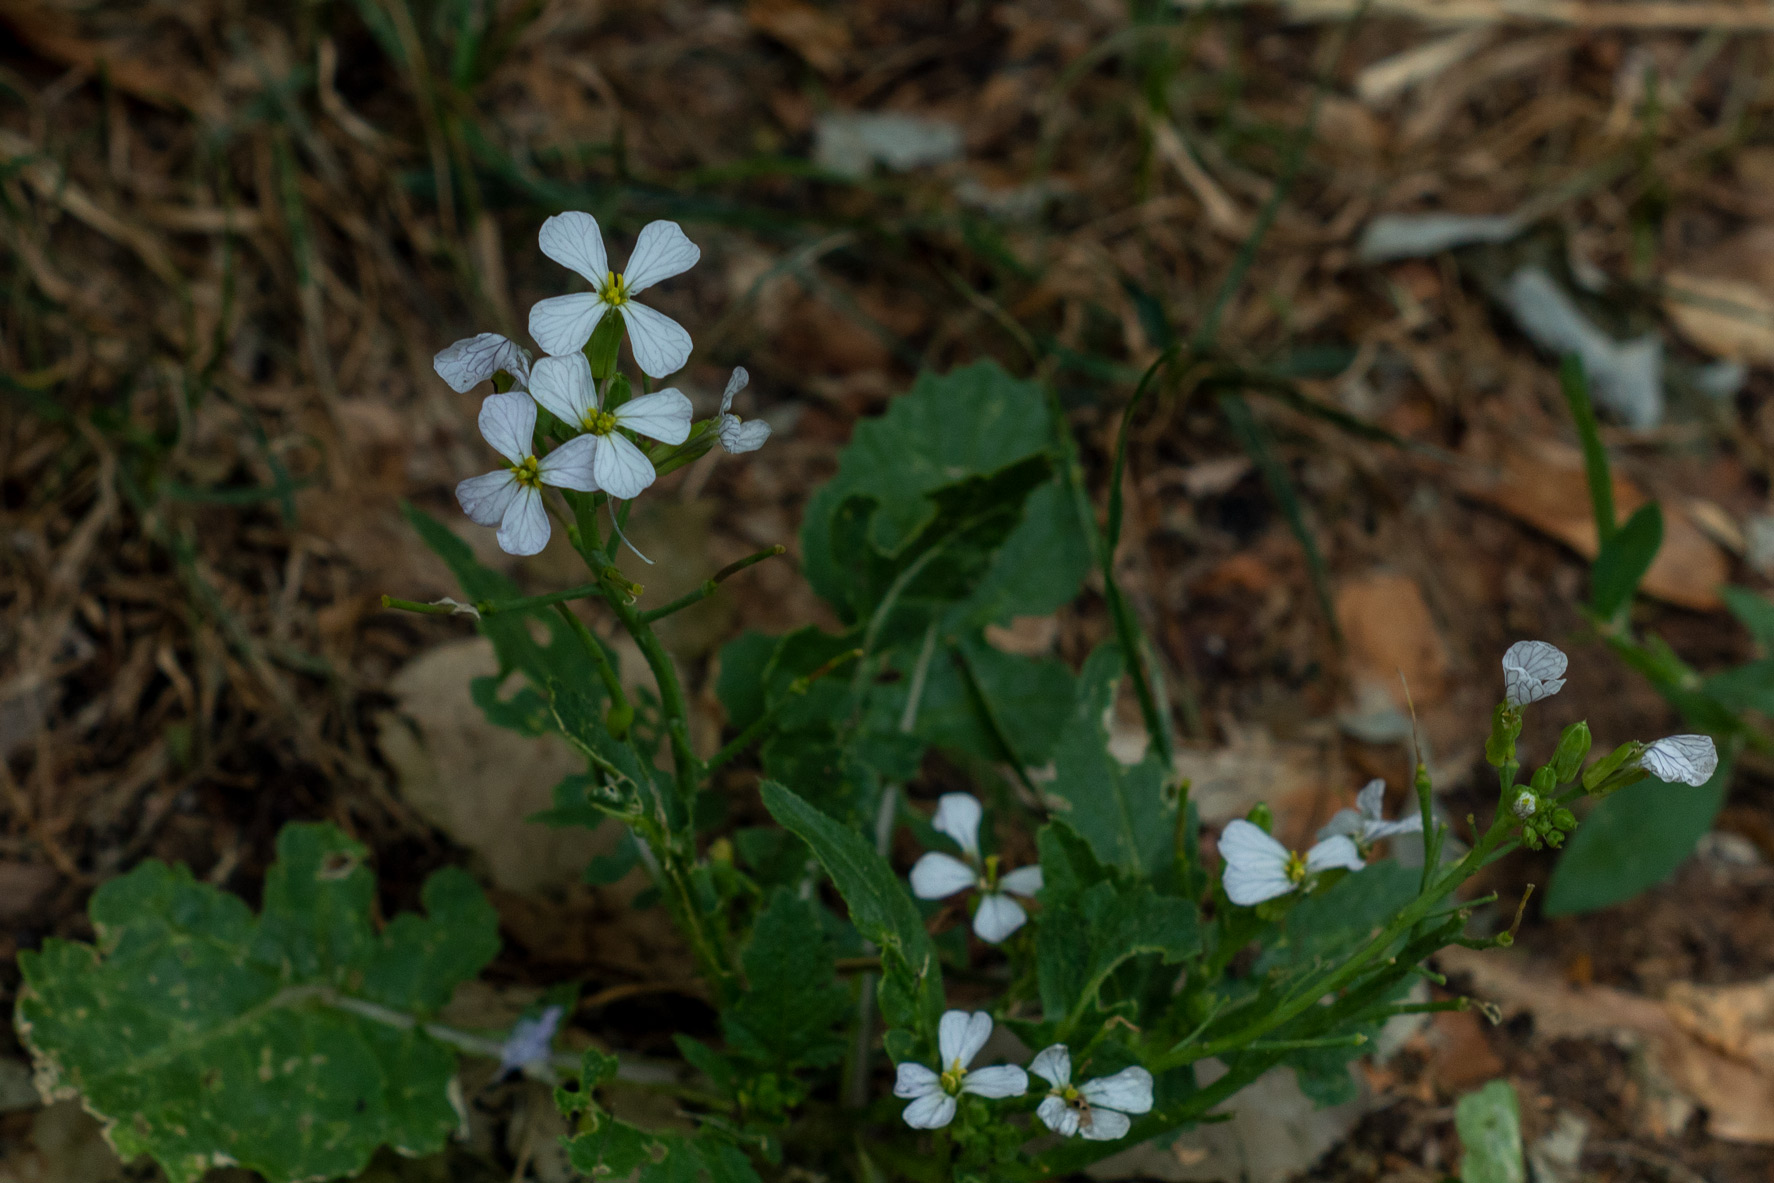 Small white flowers growing on a small green plant